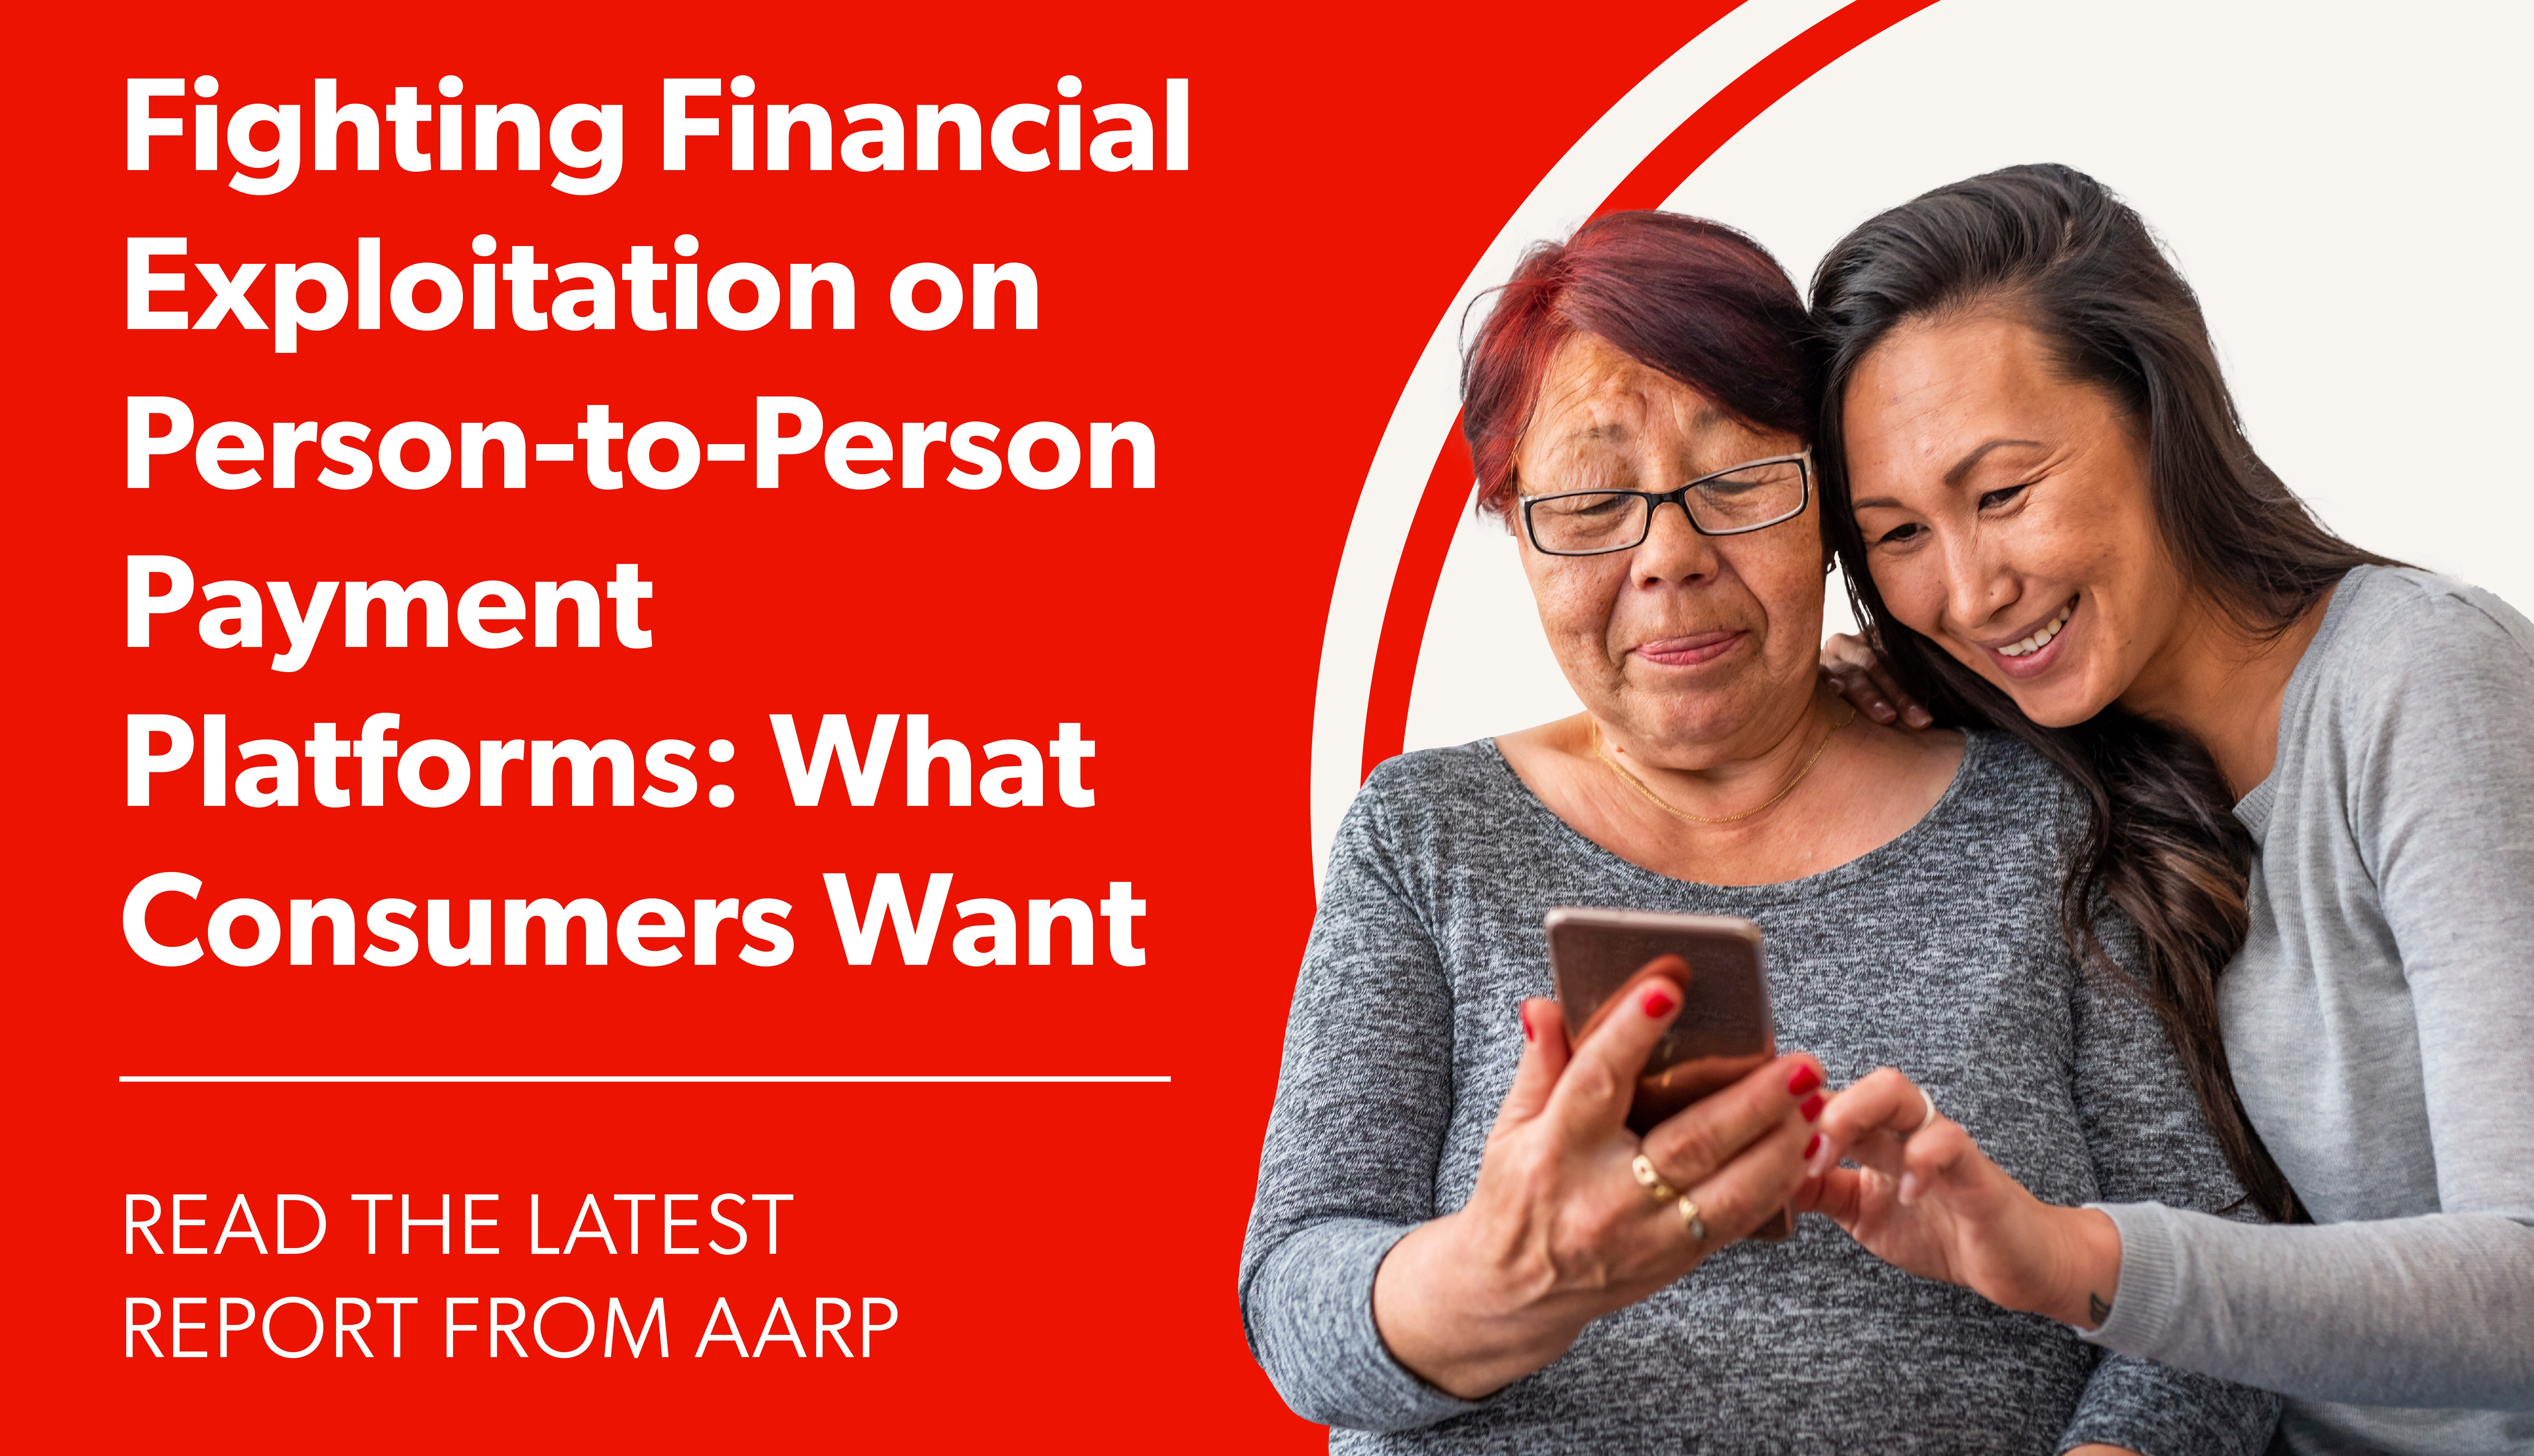 Picture of a mother and daughter looking at the mother's smartphone with the words "Fighting Financial Exploitation on Person-to-Person Payment Platforms: What Consumers Want. Read the latest report from AARP."